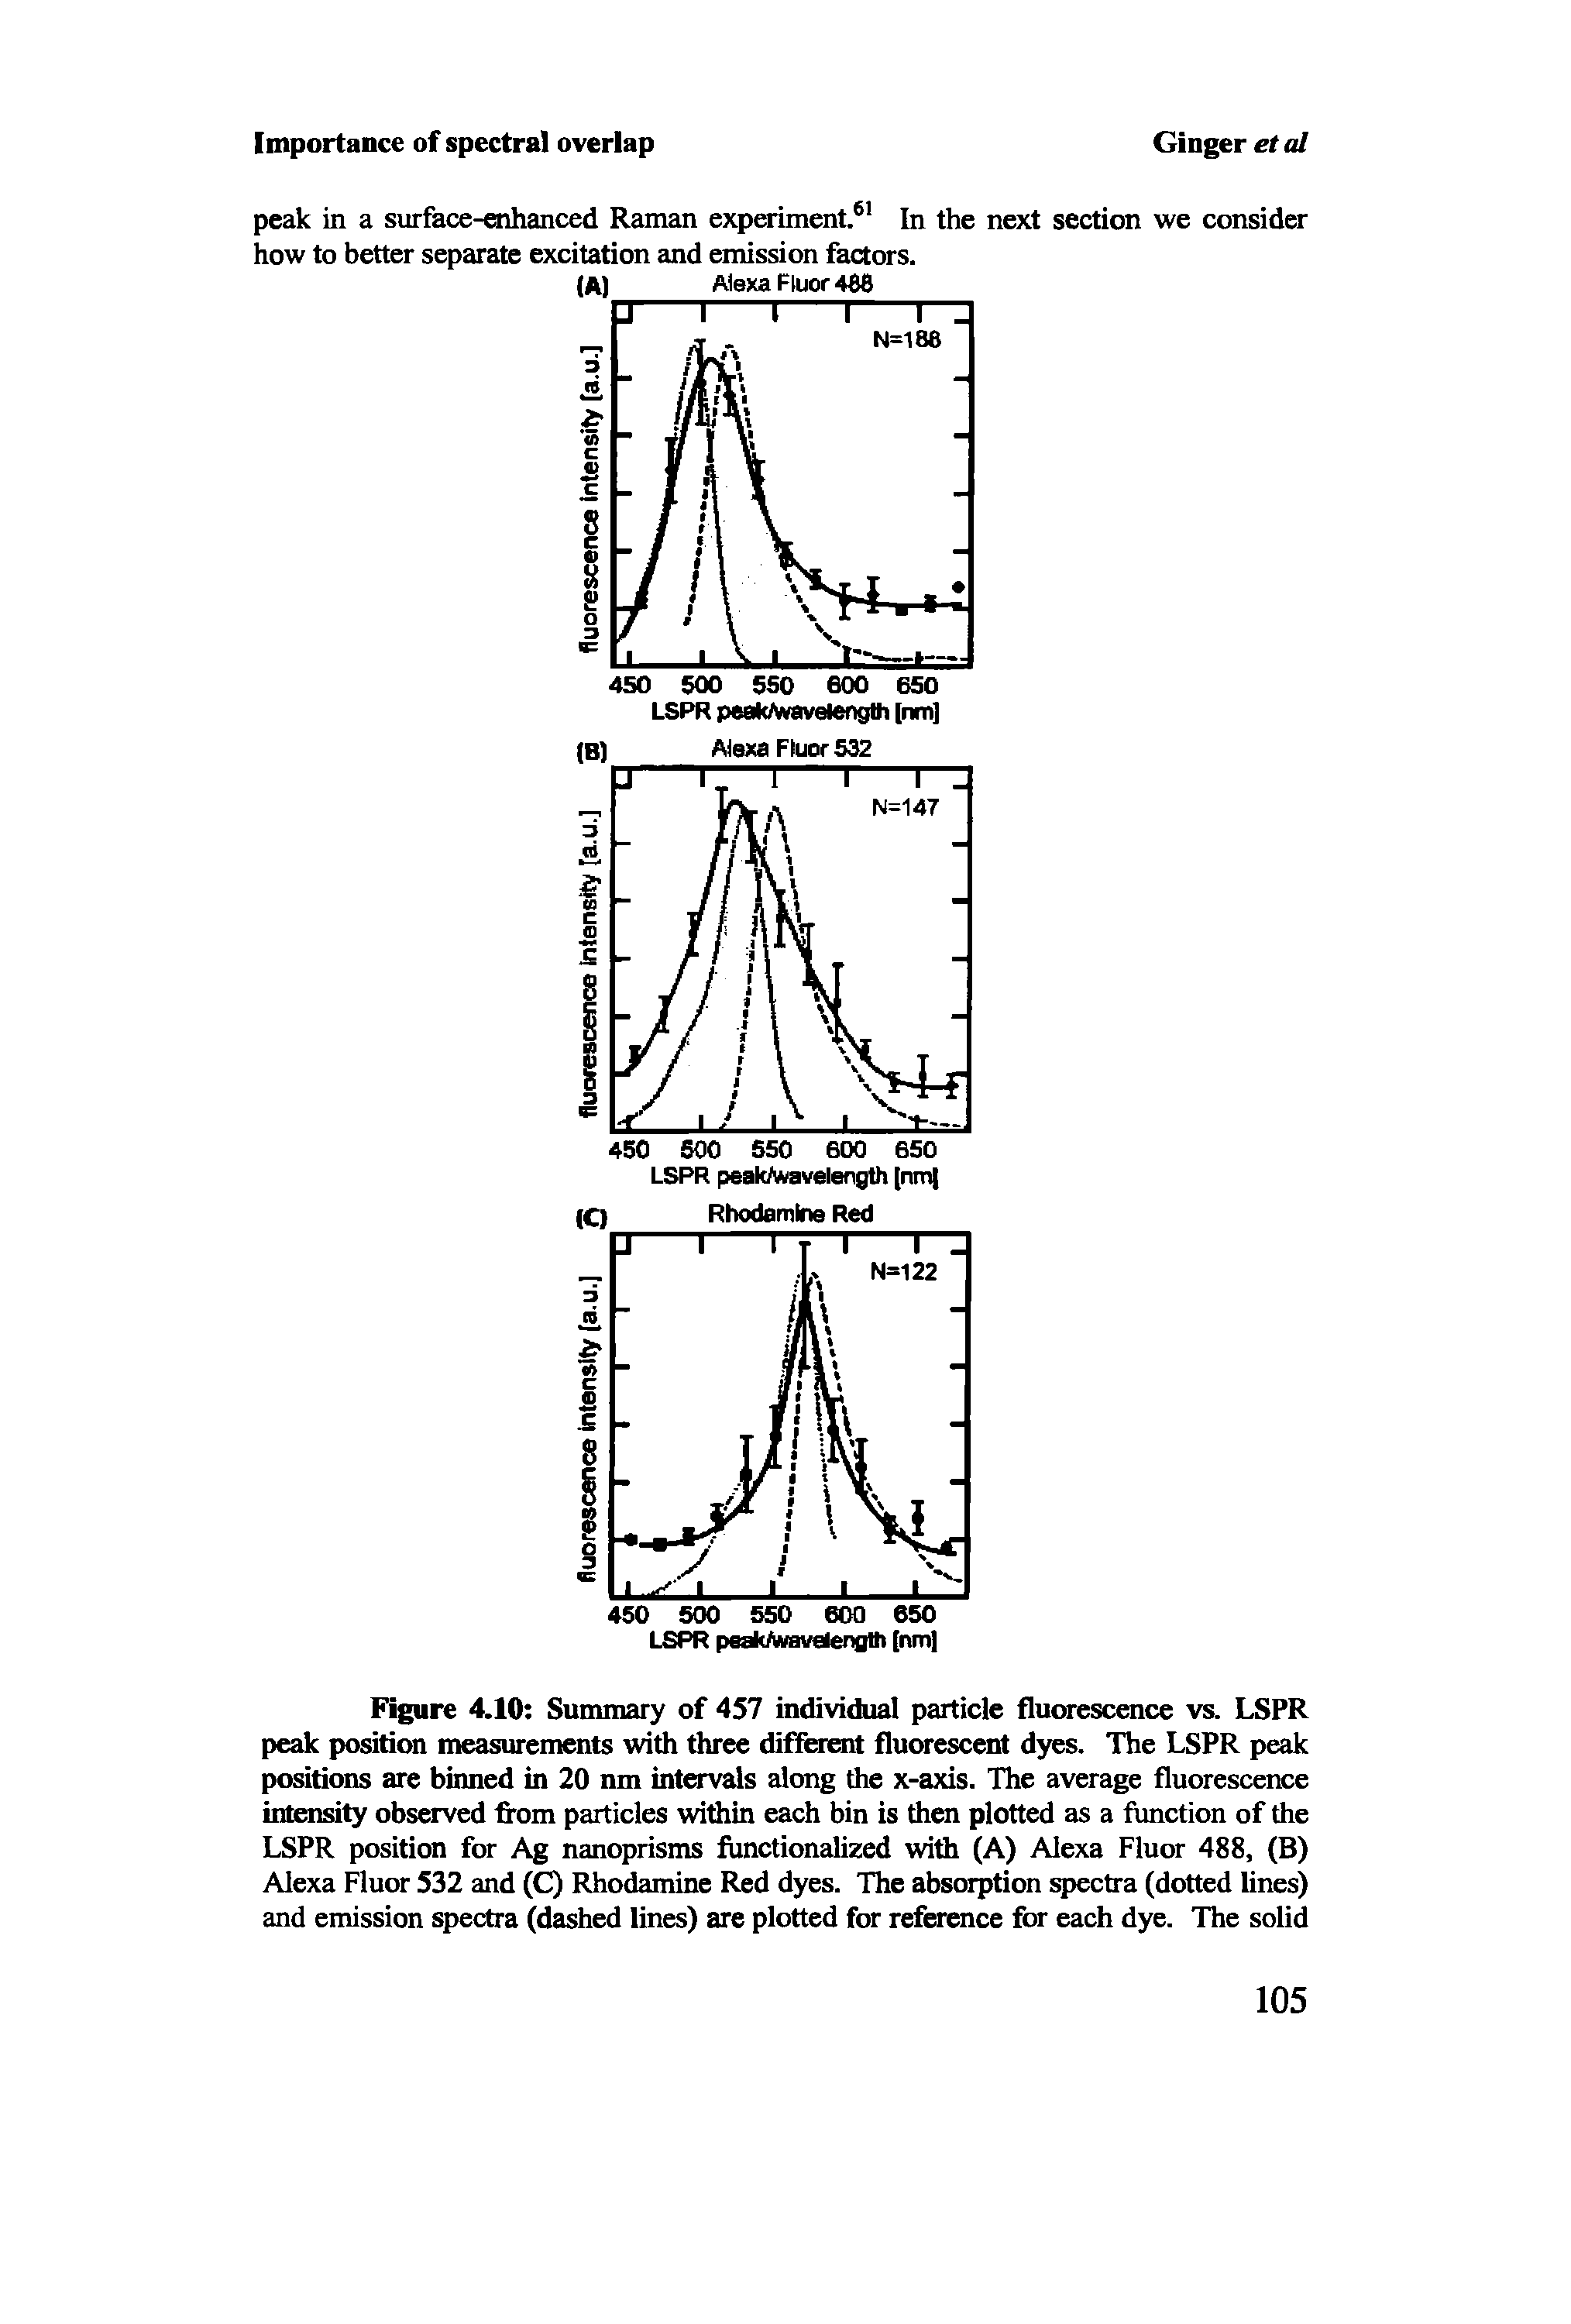 Figure 4.10 Summary of 457 individual particle fluorescence vs. LSPR peak position measurements with three different fluorescent dyes. The LSPR peak positions are binned in 20 nm intervals along the x-axis. The average fluorescence intensity observed from particles within each bin is then plotted as a function of the LSPR position for Ag nanoprisms functionalized with (A) Alexa Fluor 488, (B) Alexa Fluor 532 and (C) Rhodamine Red dyes. The absorption spectra (dotted lines) and emission spectra (dashed lines) are plotted for reference for each dye. The solid...